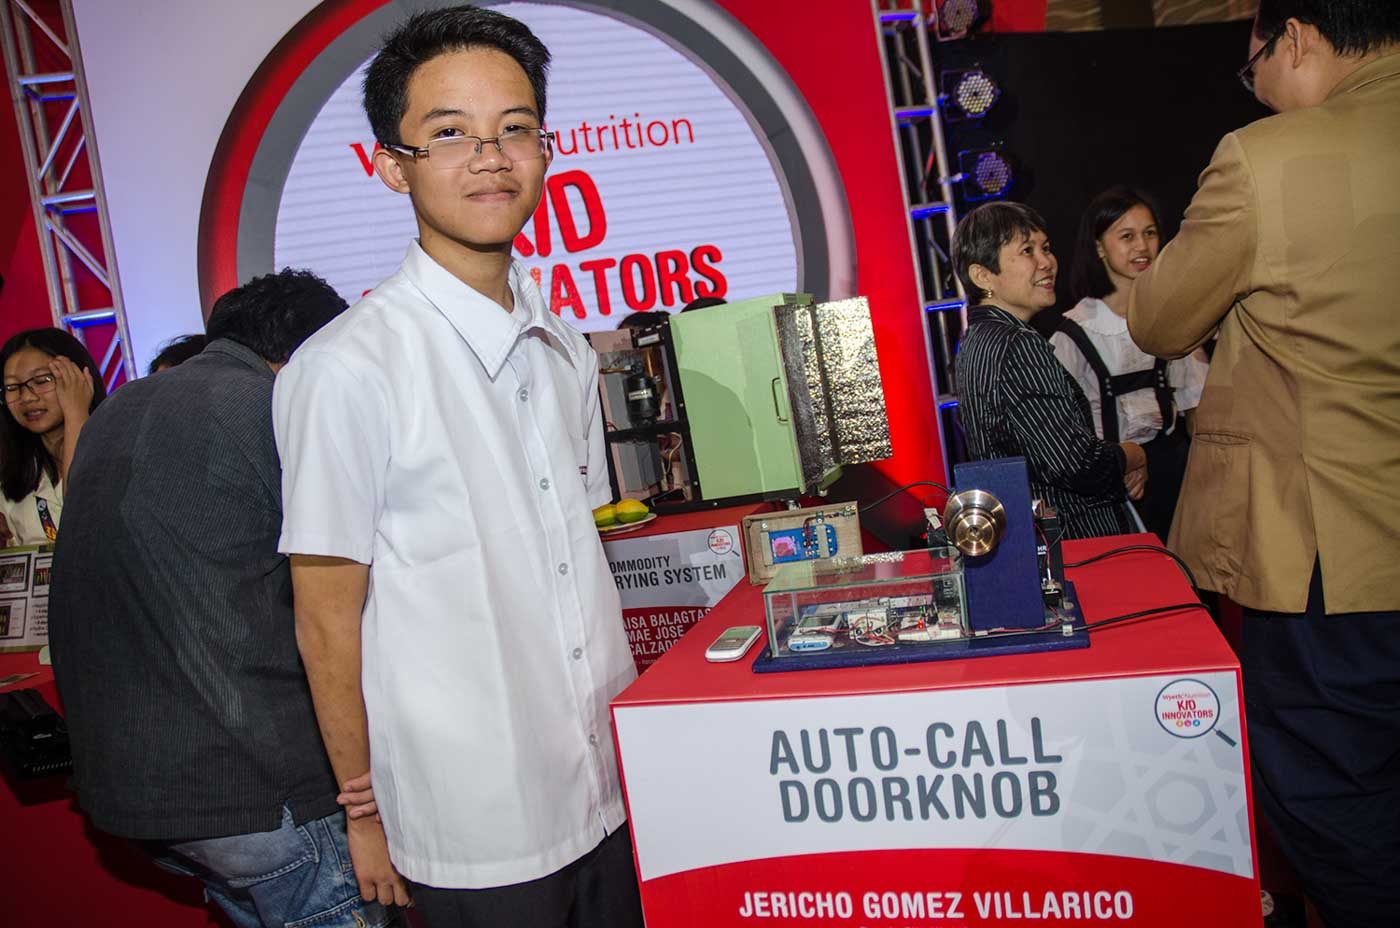 THE AUTO CALL DOORKNOB. This innovation by Jericho Gomez Villarico from Baguio City High School alerts the owner of the house through a phone call when an intruder attempts to open the locked doorknob. Photo by Rappler/Rob Reyes 